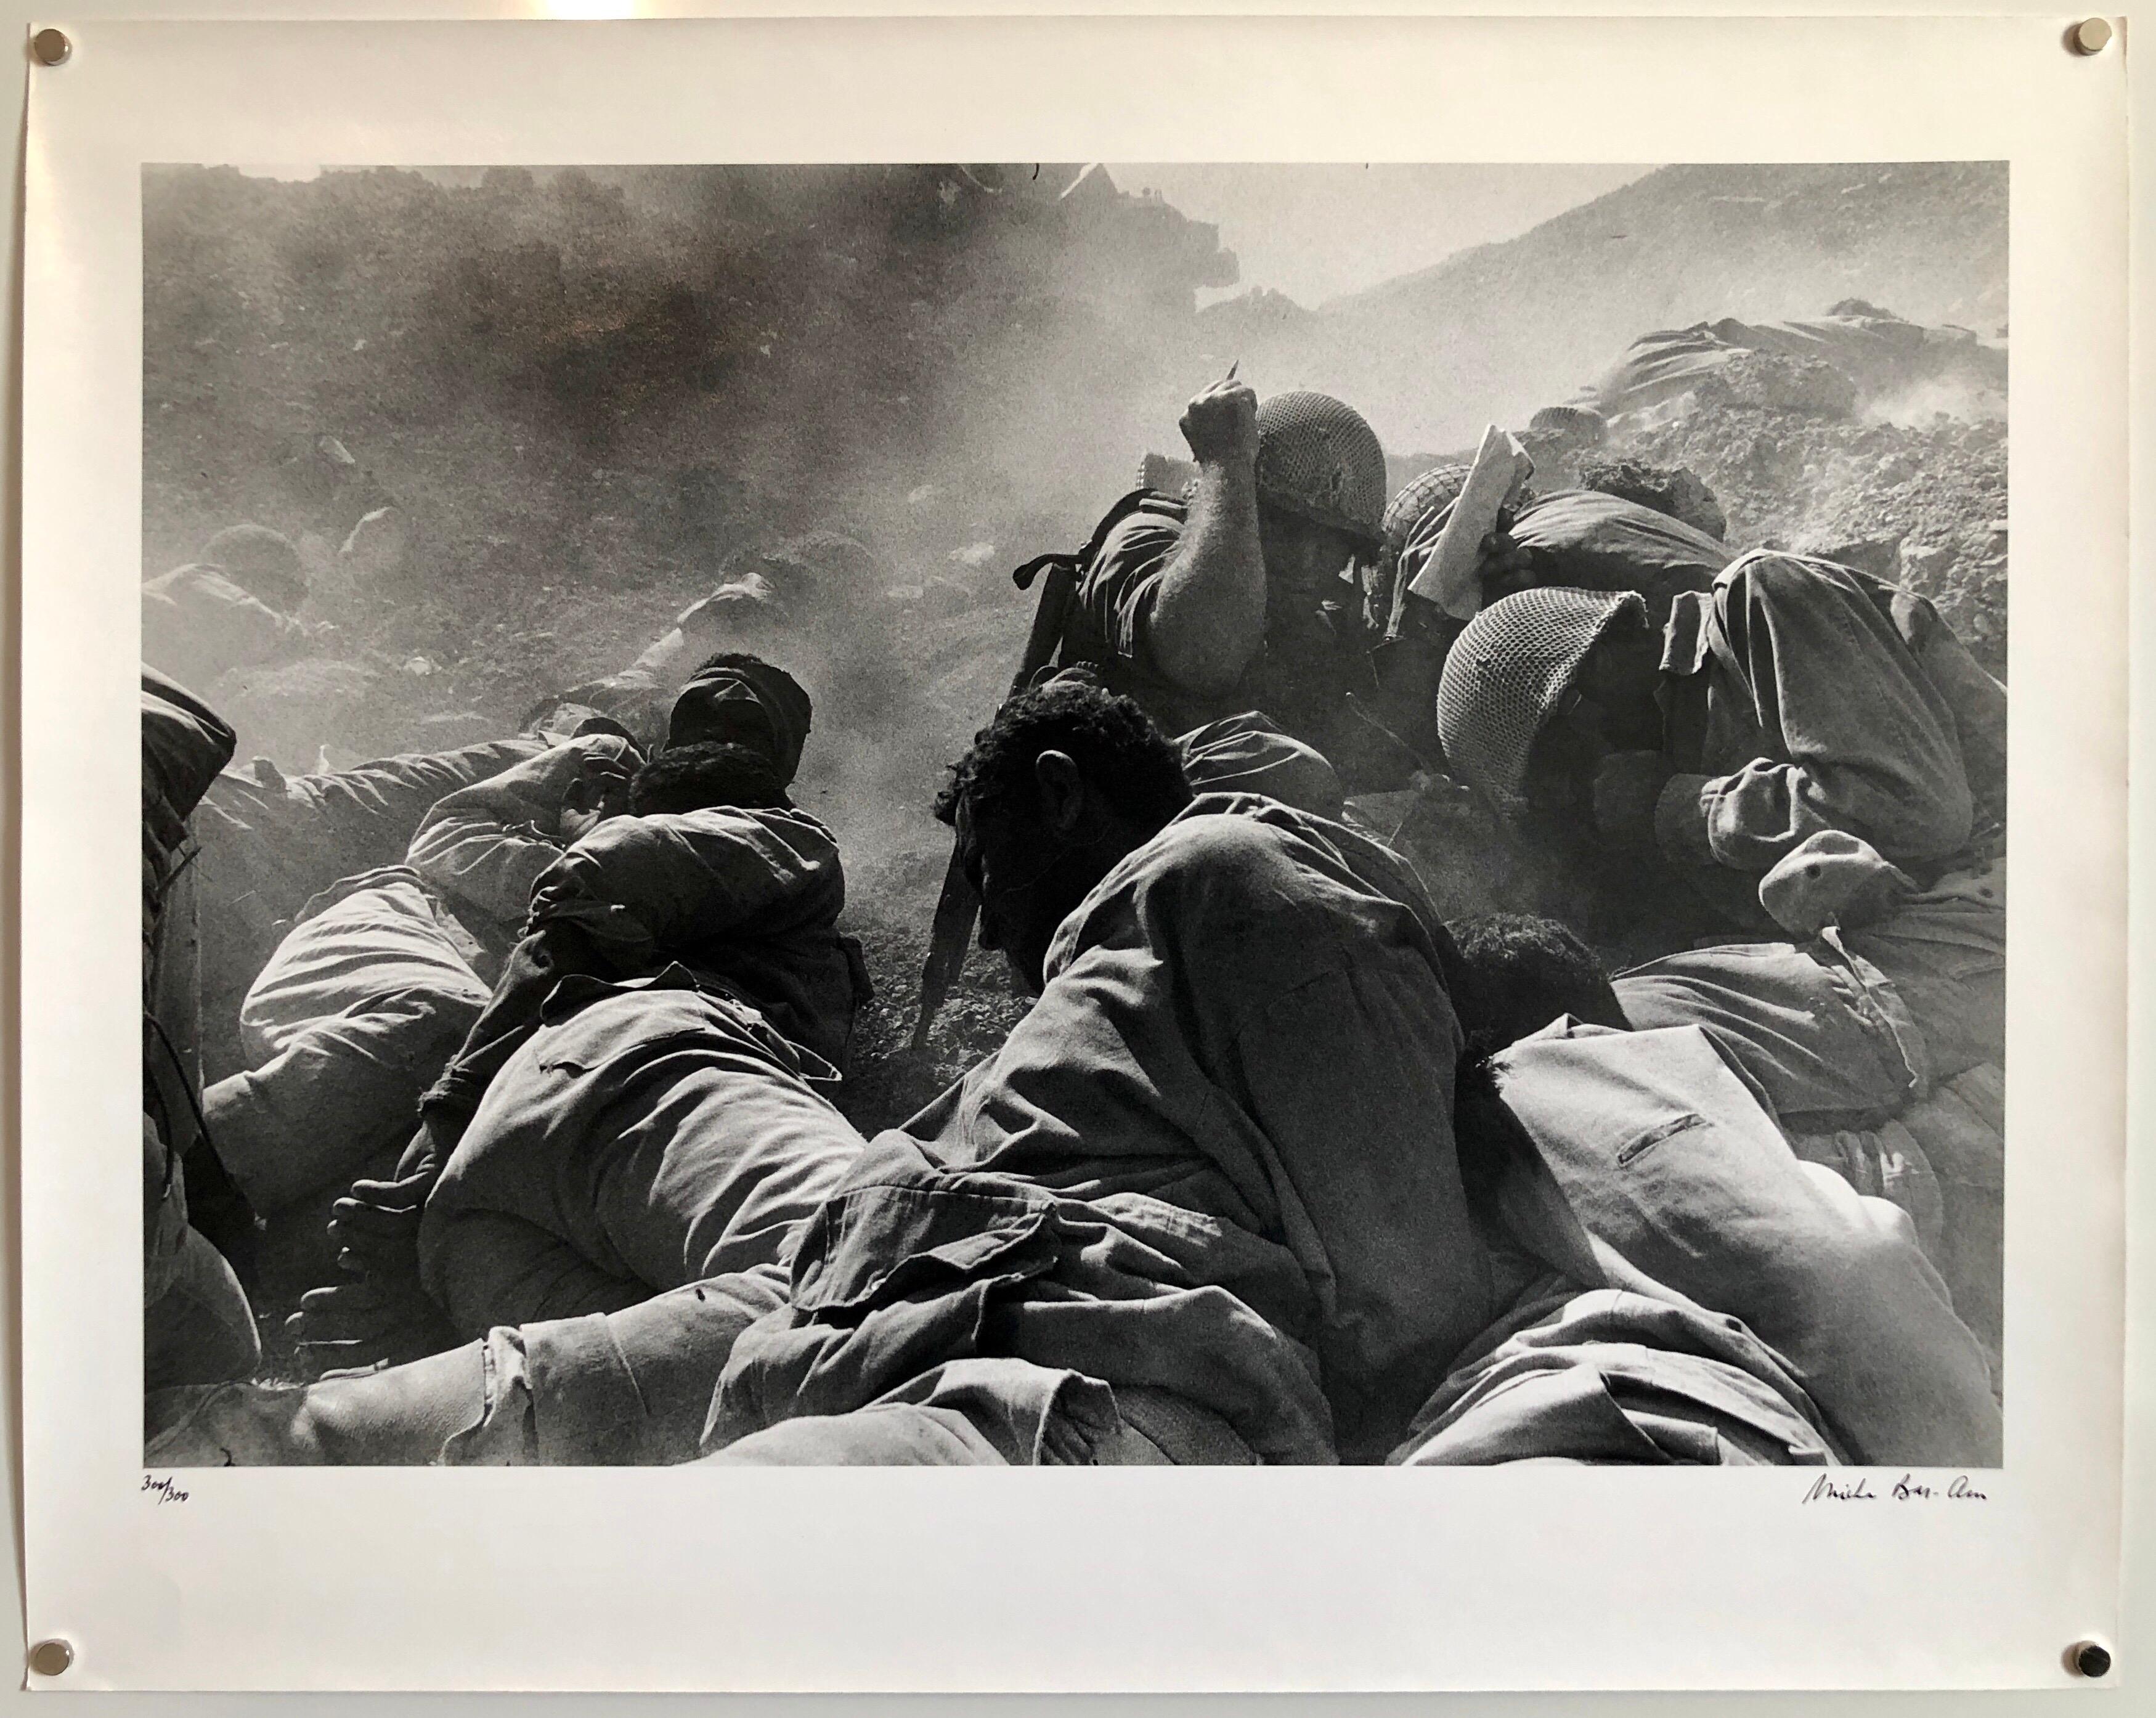 Rare vintage signed and dated silver gelatin black & white unframed photograph. (printed circa 19730-1981) signed and numbered in ink on recto. Hand developed by or under the personal direction of Micha Bar Am at the studio of acclaimed printer